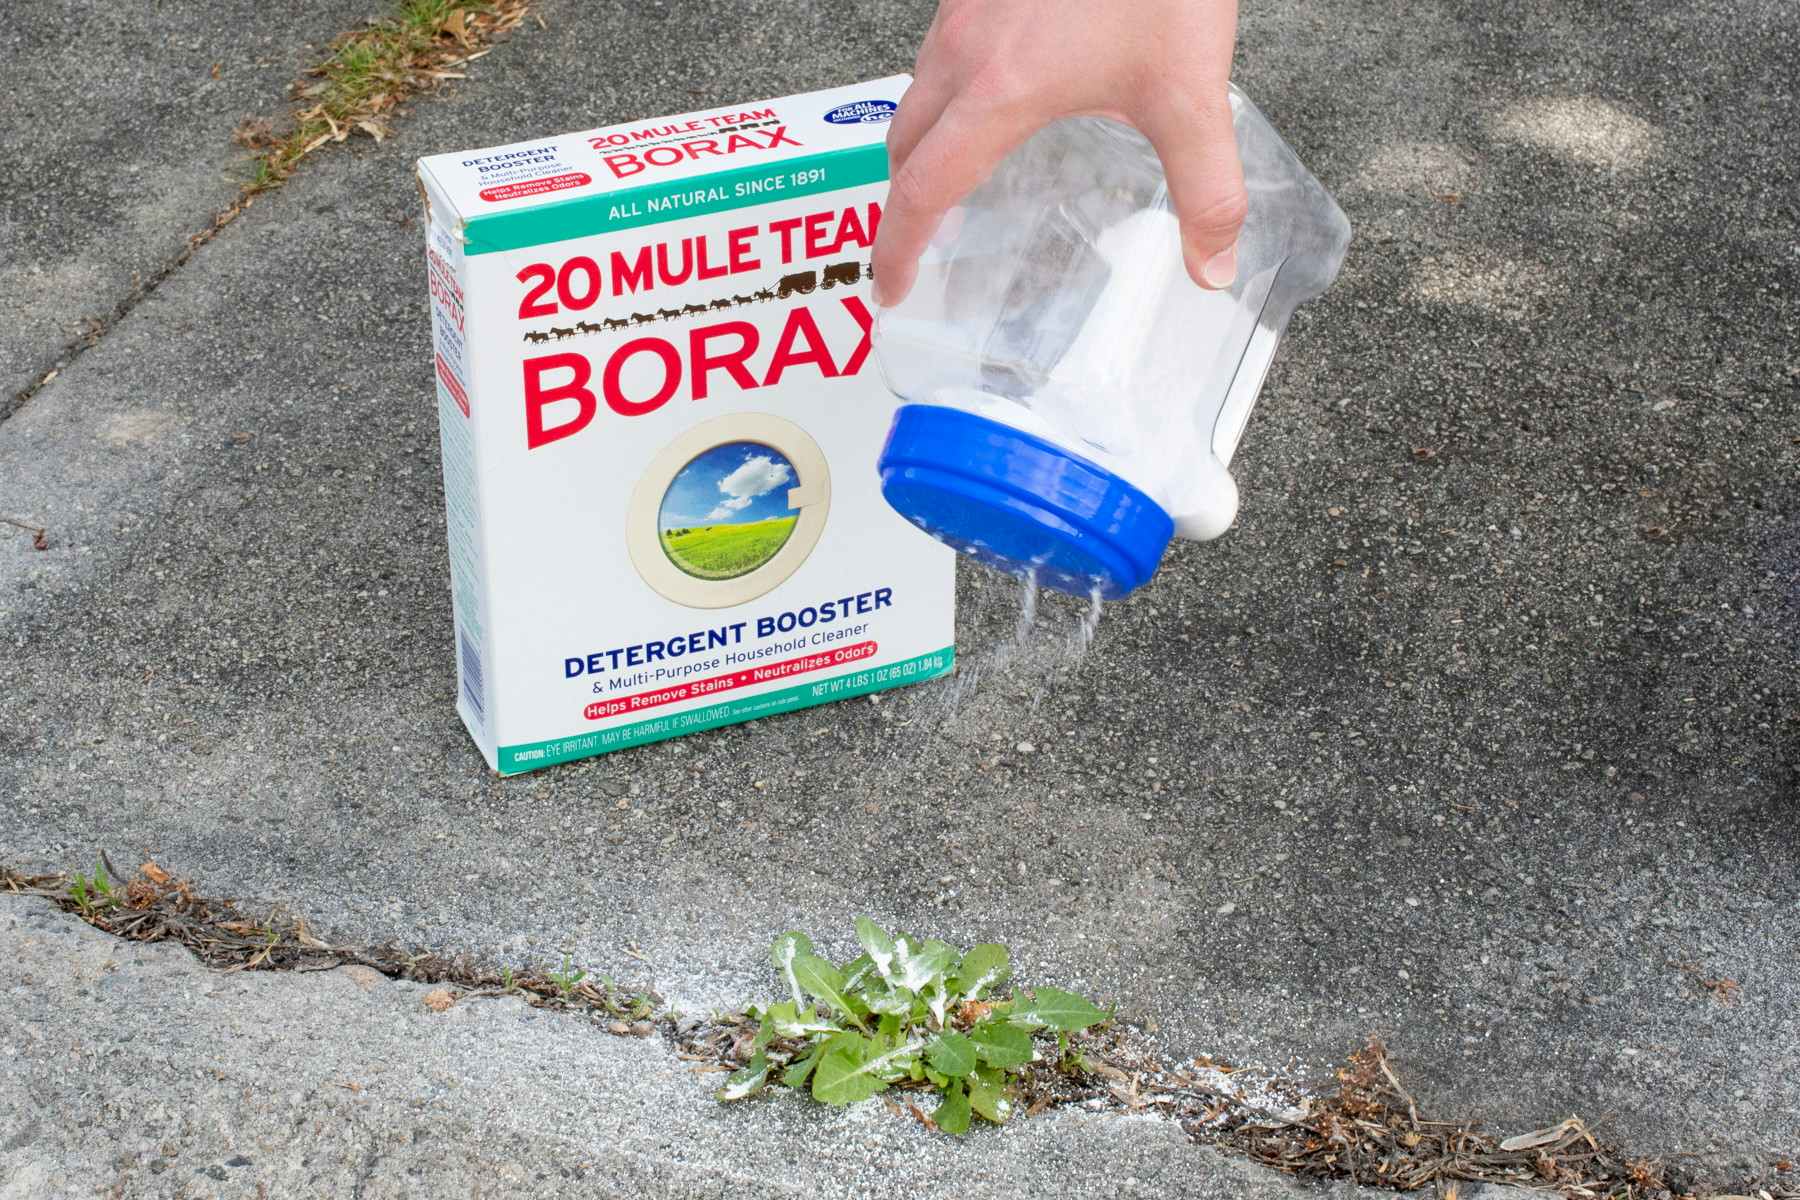 Sprinkle Borax on unwanted weeds or plants for a natural herbicide.